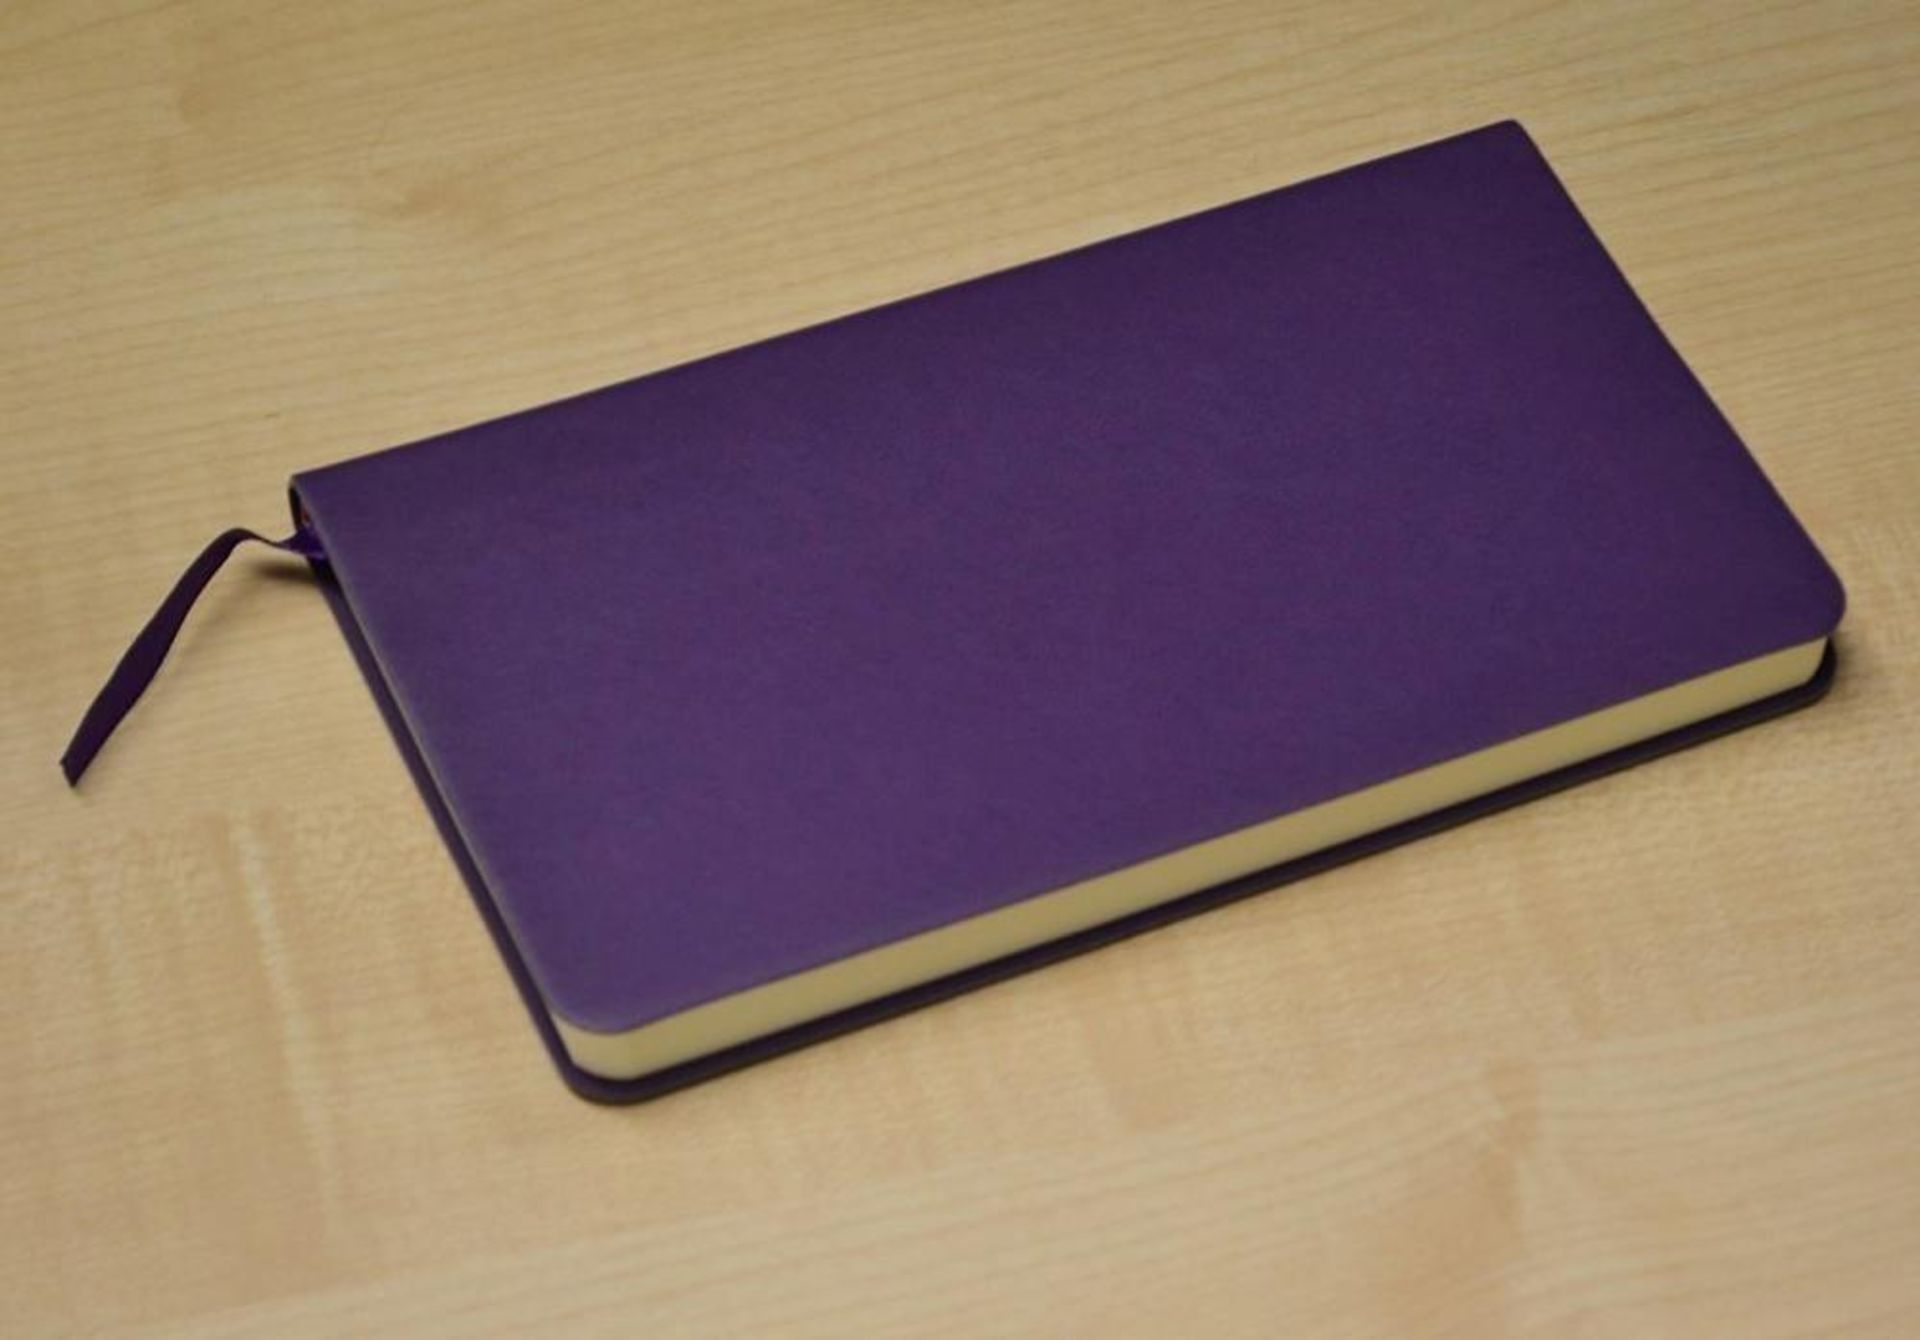 100 x ICE LONDON "Slim" Faux Leather Covered Notebooks In Bright Purple - Dimensions: 17.7 x - Image 3 of 3